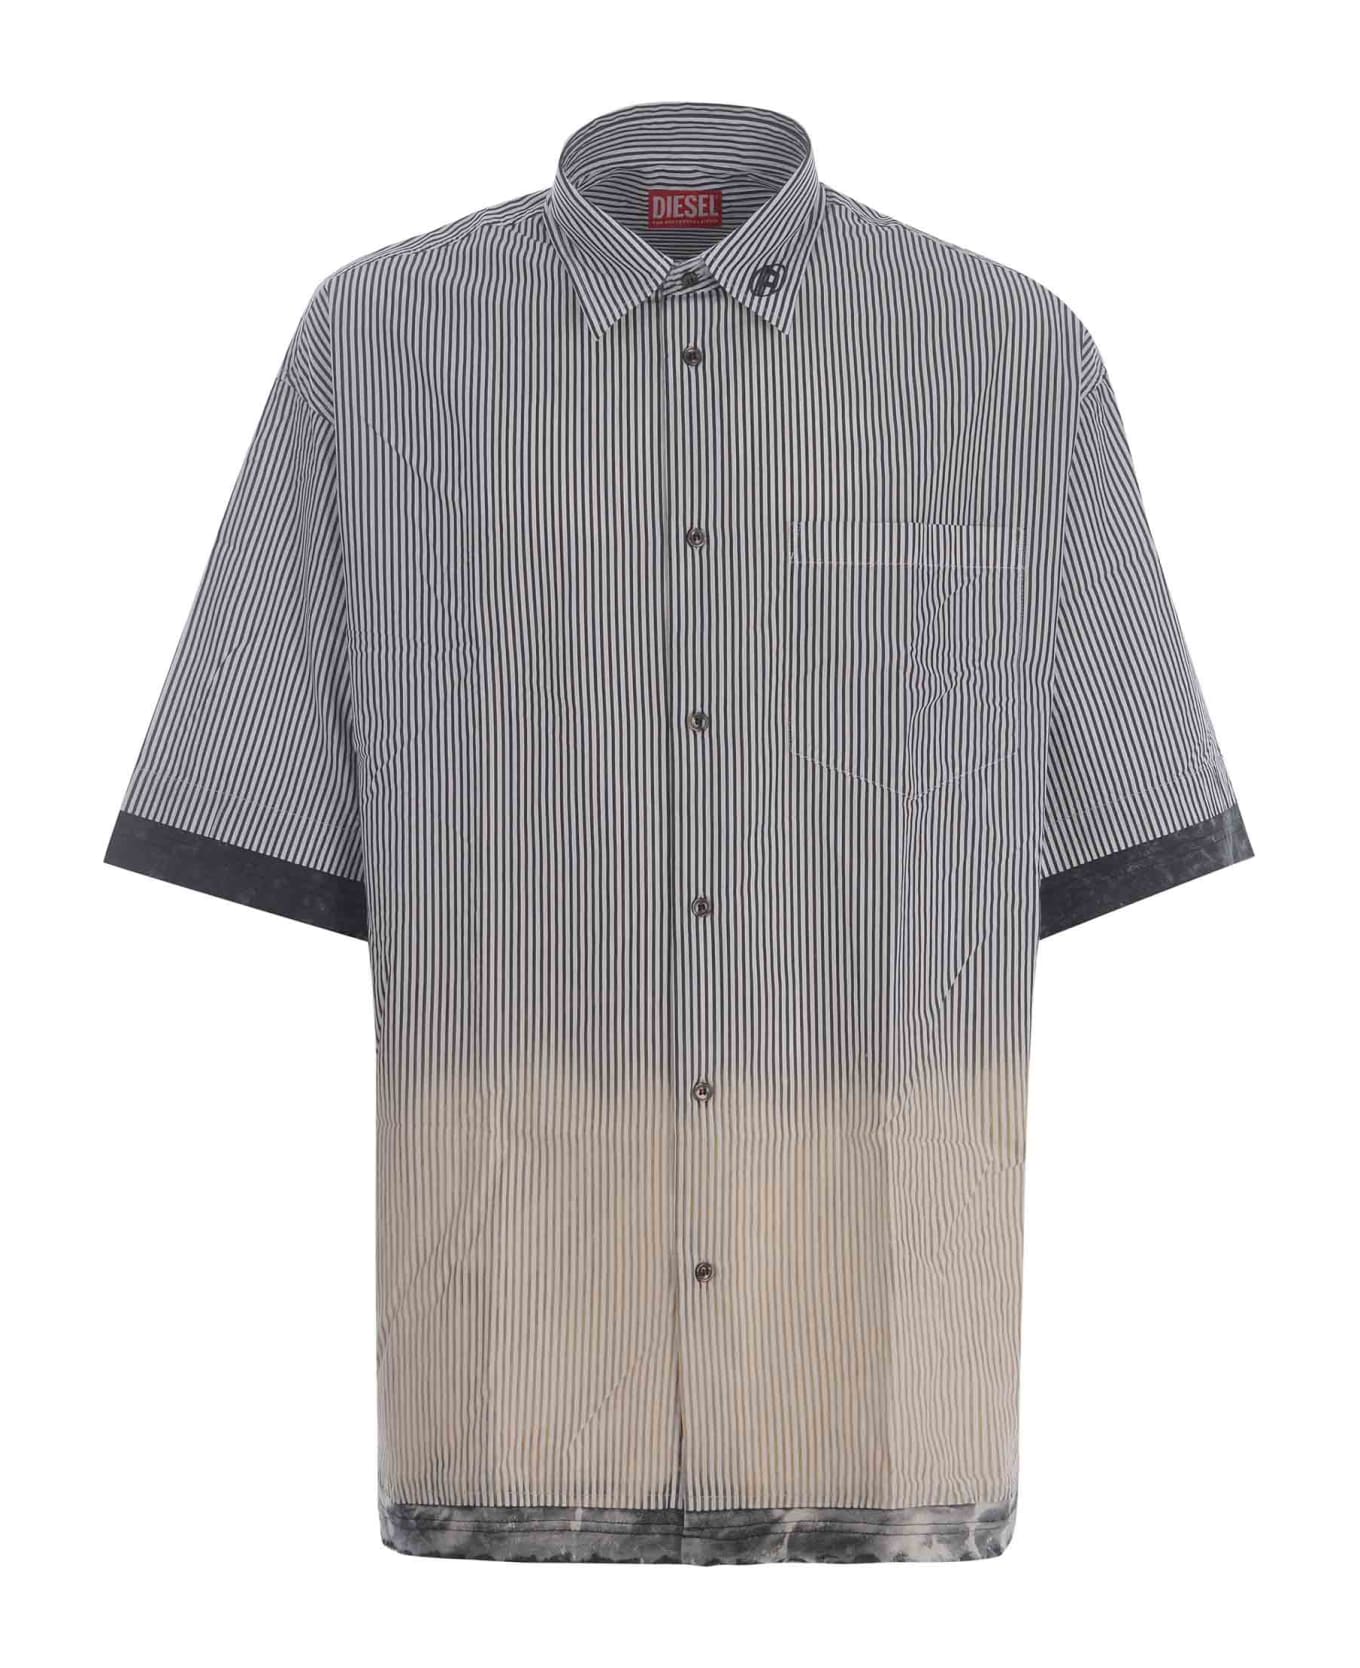 Diesel Camicia Diesel "trax" Made Of Cotton - Bianco